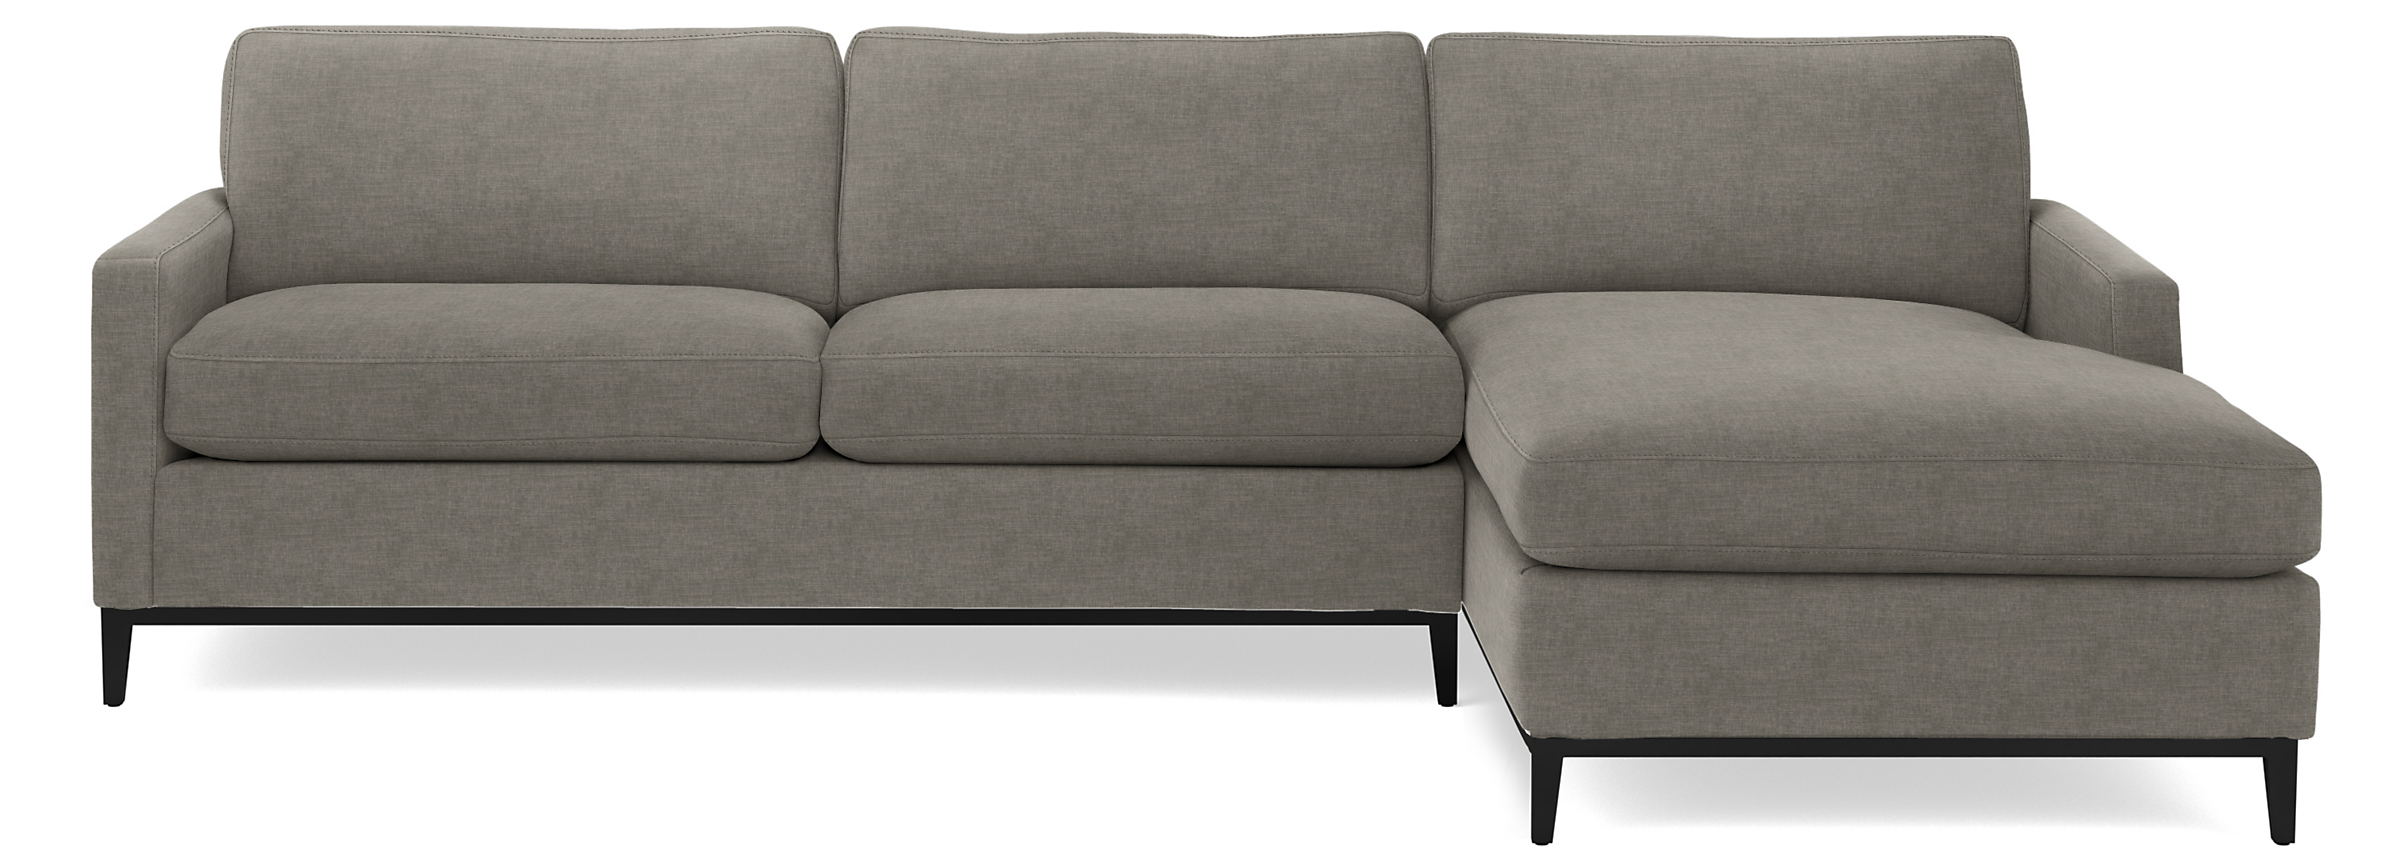 Robin 116" Sofa with Right-Arm Chaise